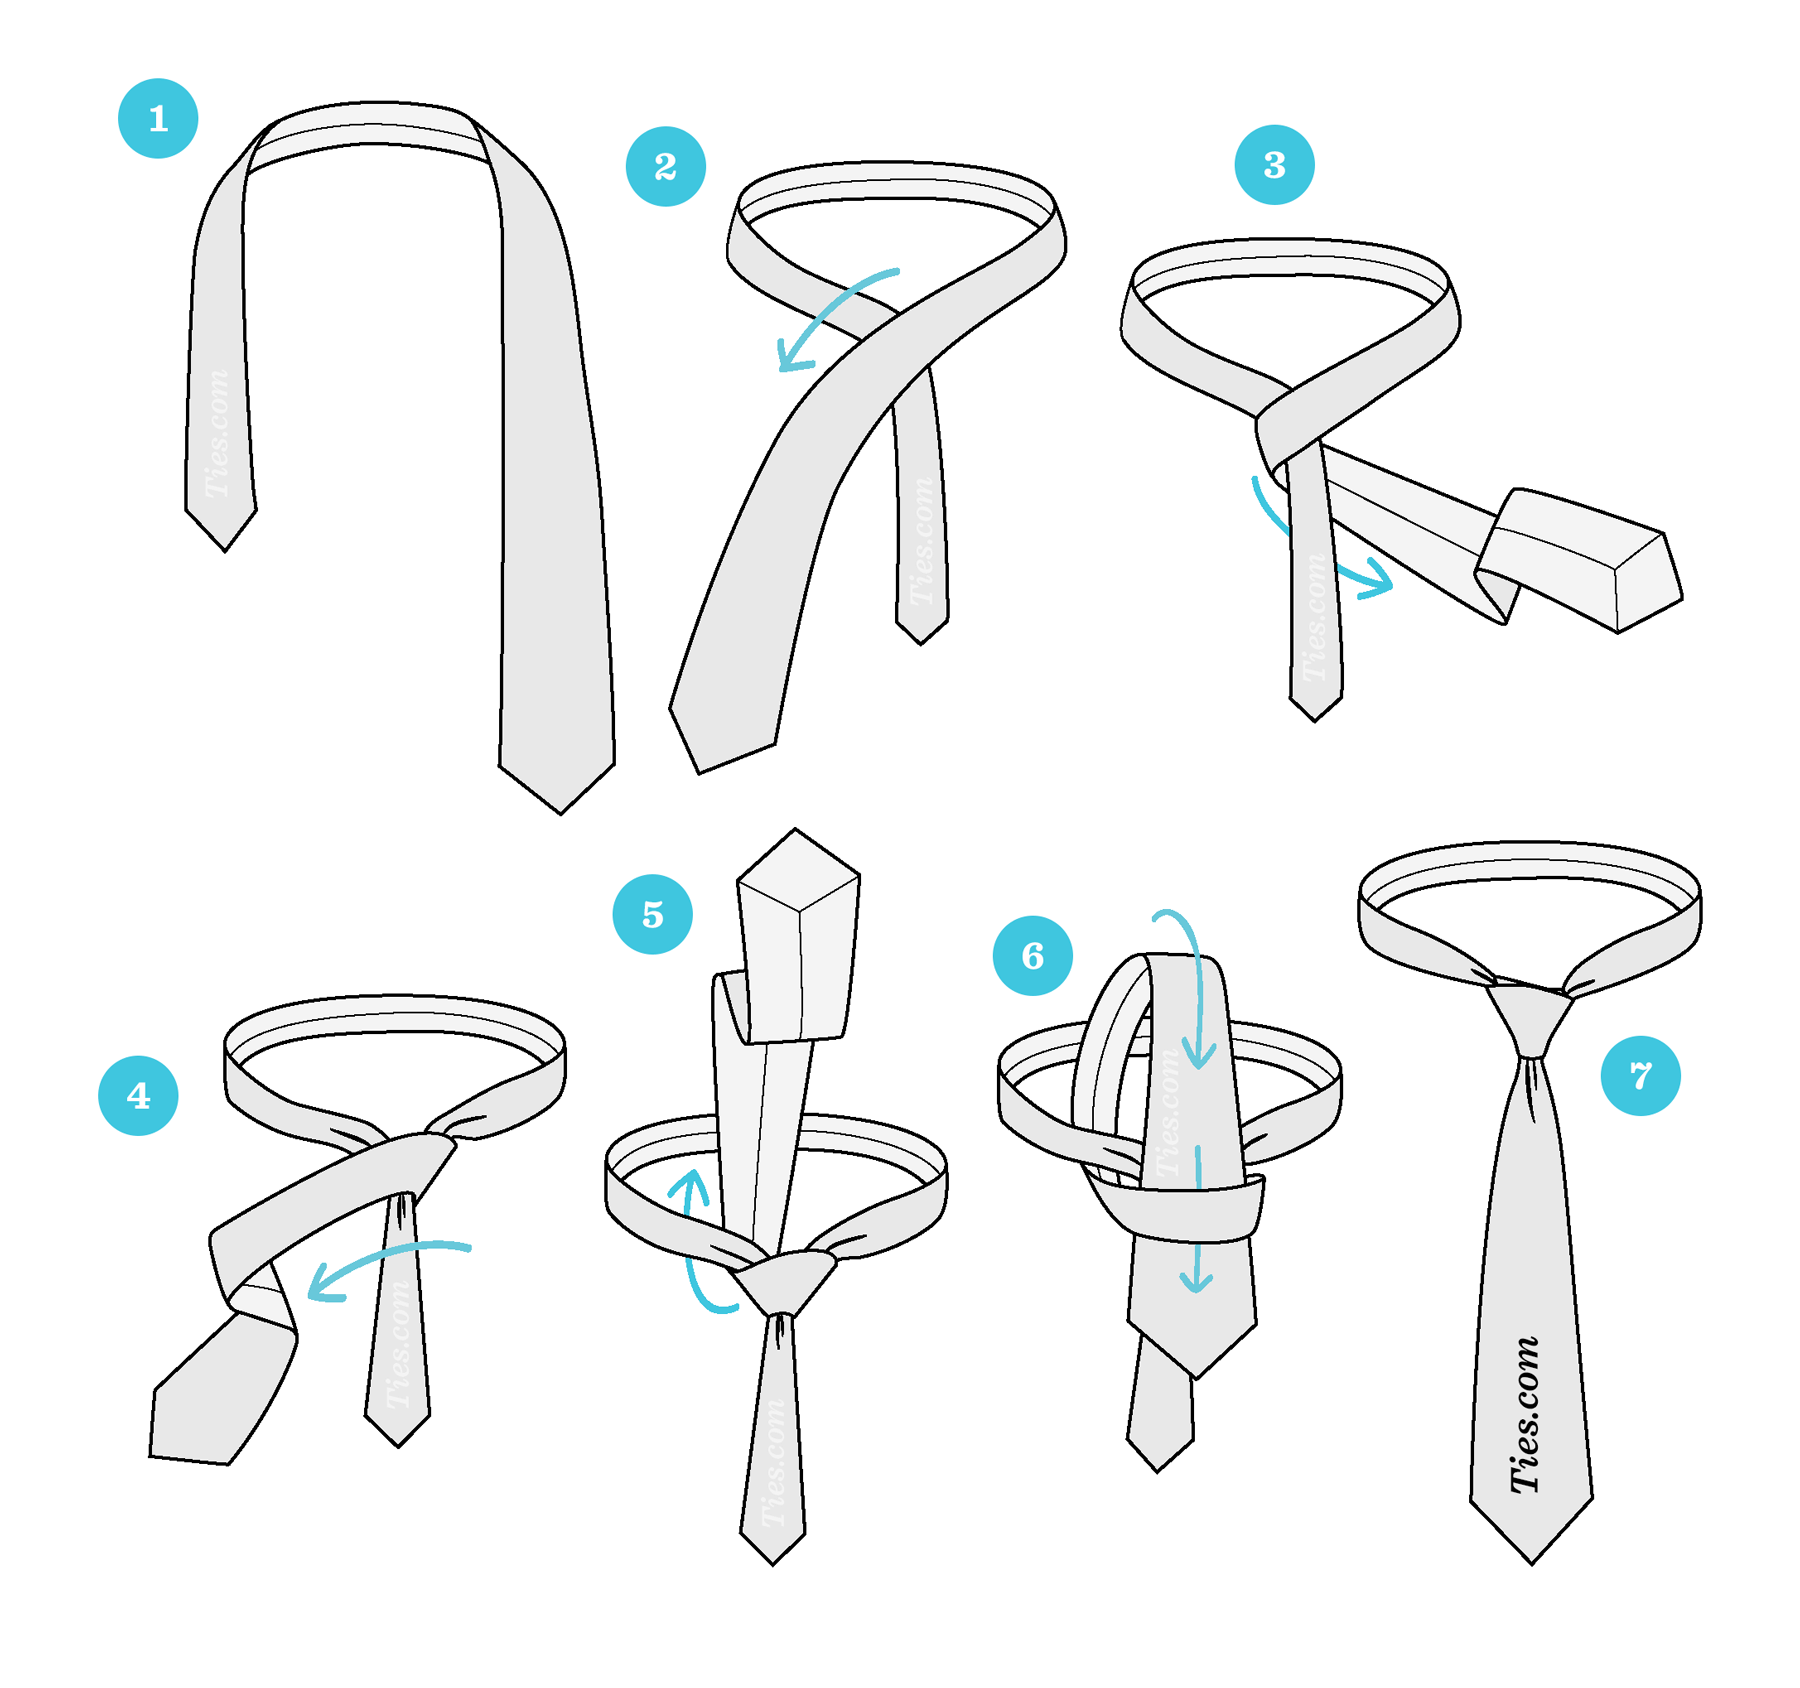 3 easy ways to tie a tie, 3 easy ways to tie a tie. I'm a pro now!👔😎  bit.ly/2gd3orC, By 5-Minute Crafts